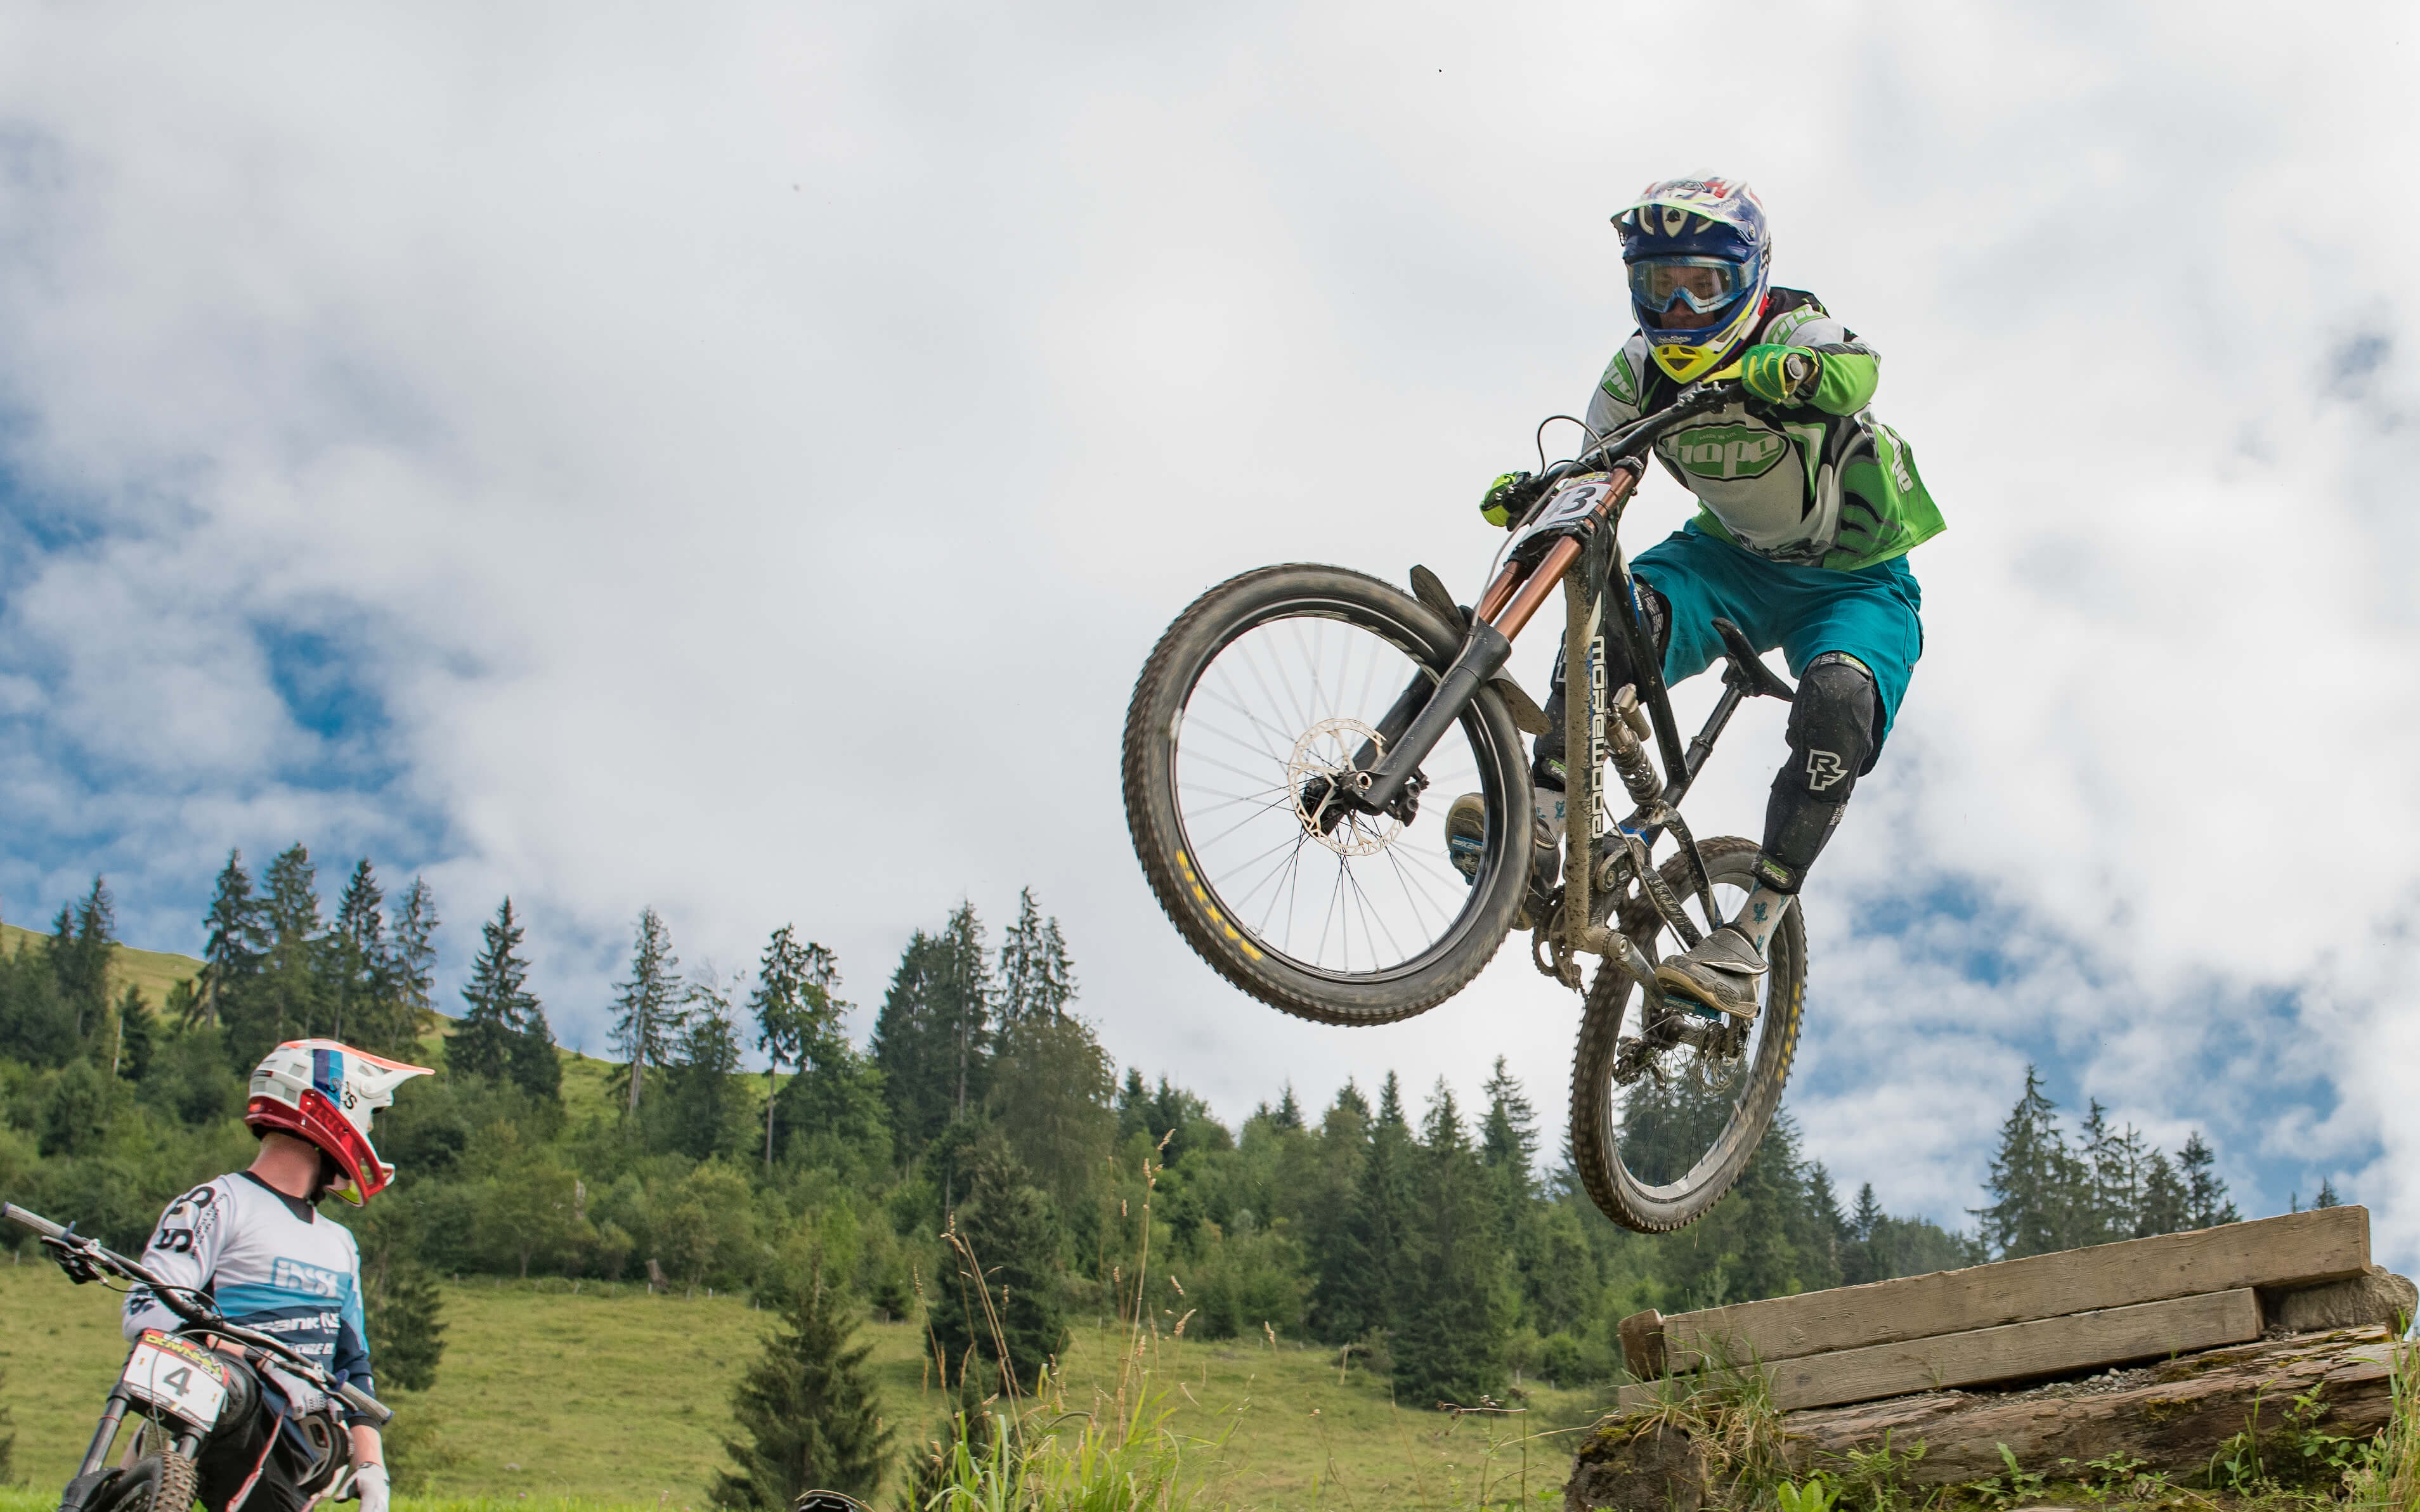 Courageous jumps on the Wiriehorn downhill trail